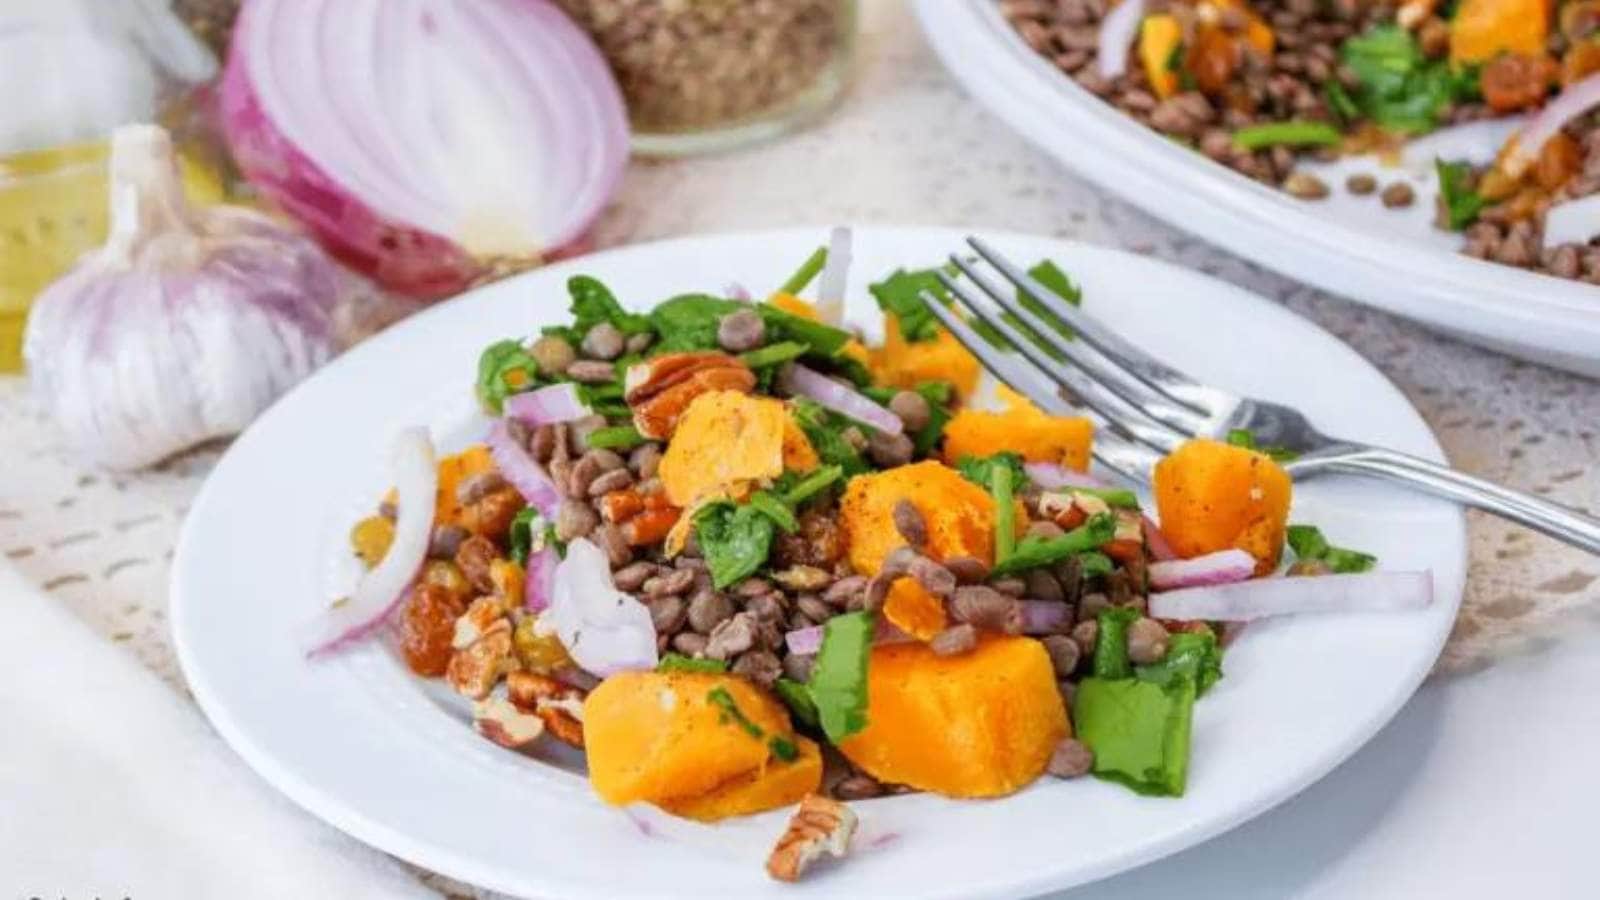 Thanksgiving Salad With Butternut Squash And Lentils recipe by Salads For Lunch.